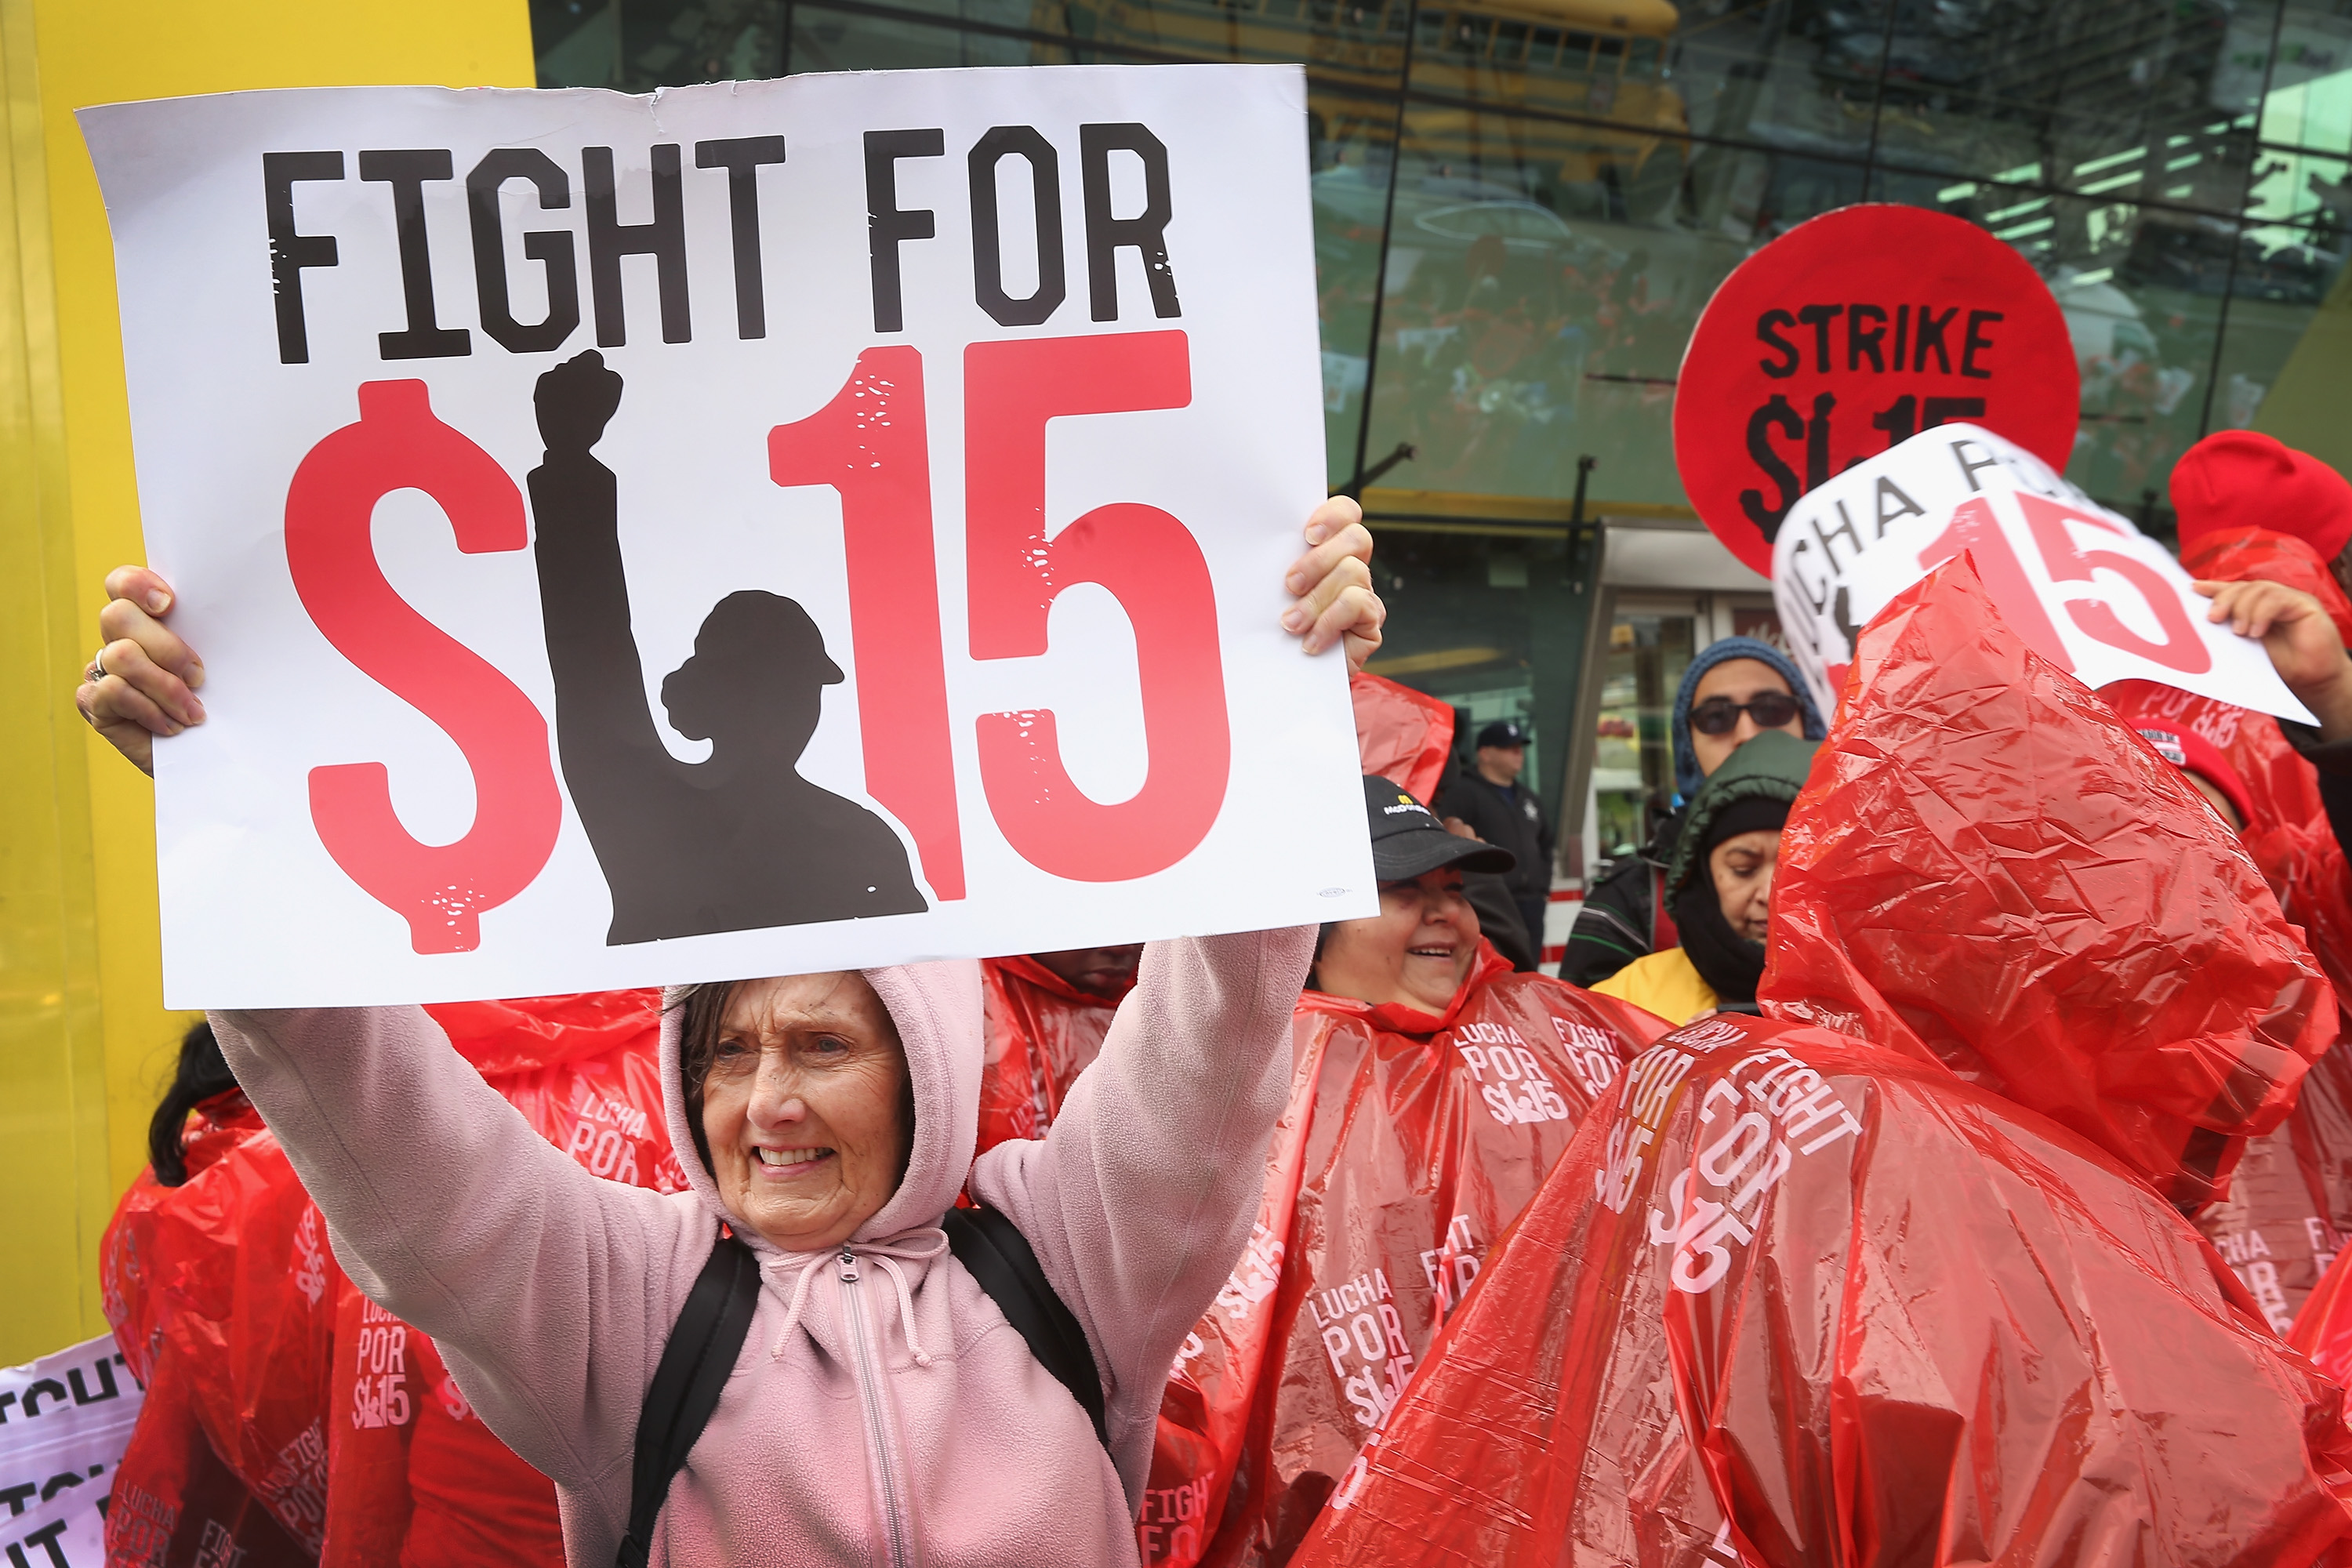 Fast food workers and activists demonstrate outside McDonald's downtown flagship restaurant on May 15, 2014 in Chicago, Illinois. (Scott Olson—Getty Images)